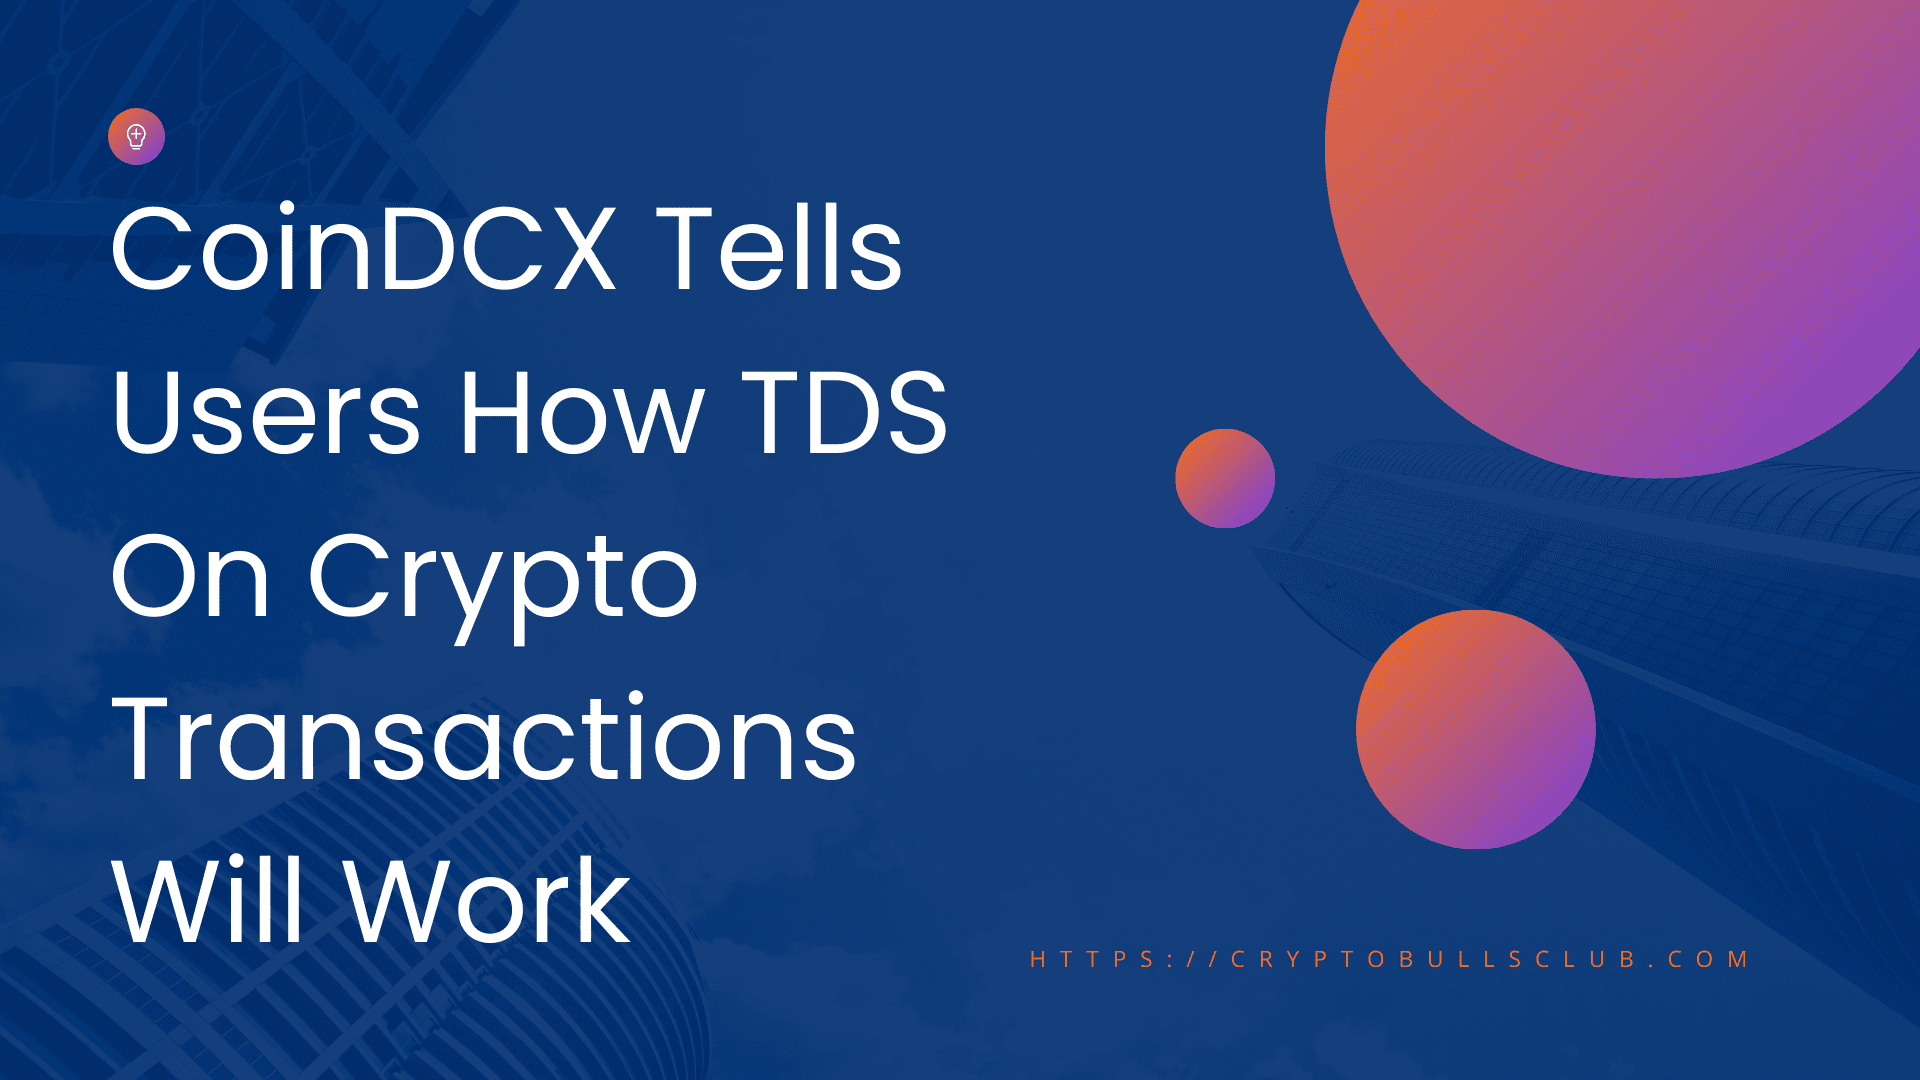 CoinDCX Tells Users How TDS On Crypto Transactions Will Work